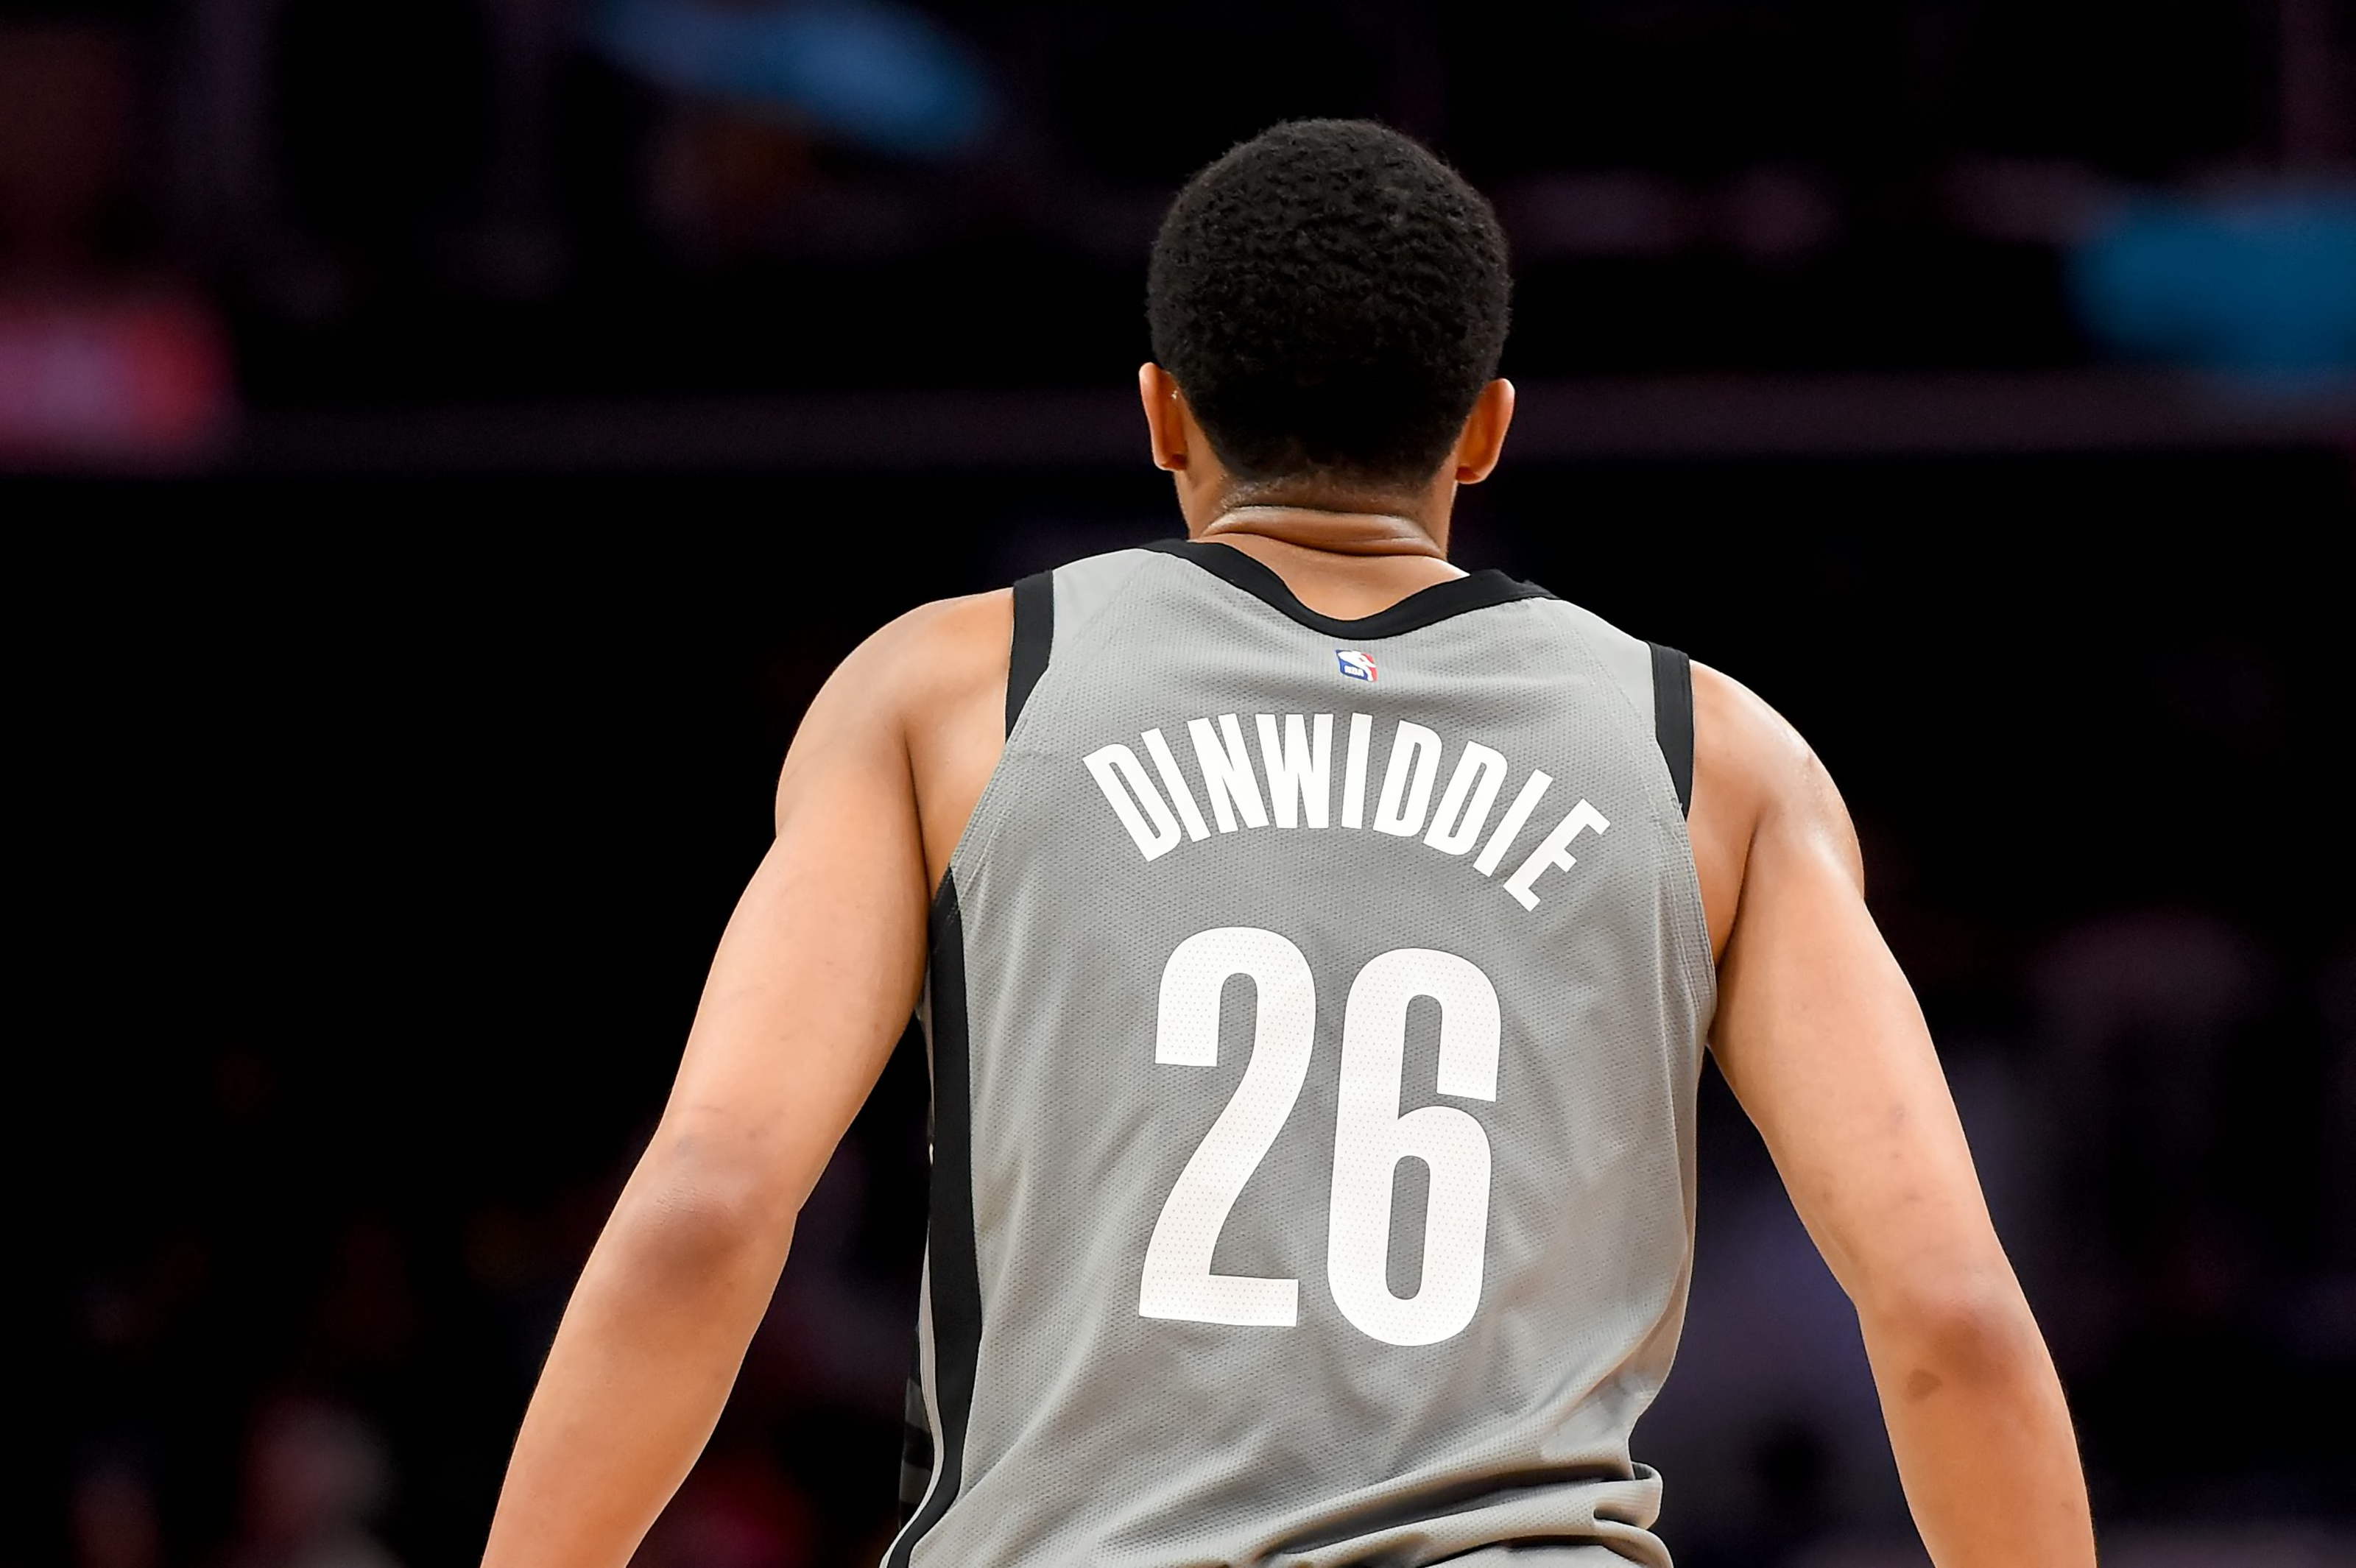 NBC Sports - Brooklyn Nets guard Spencer Dinwiddie, who used to